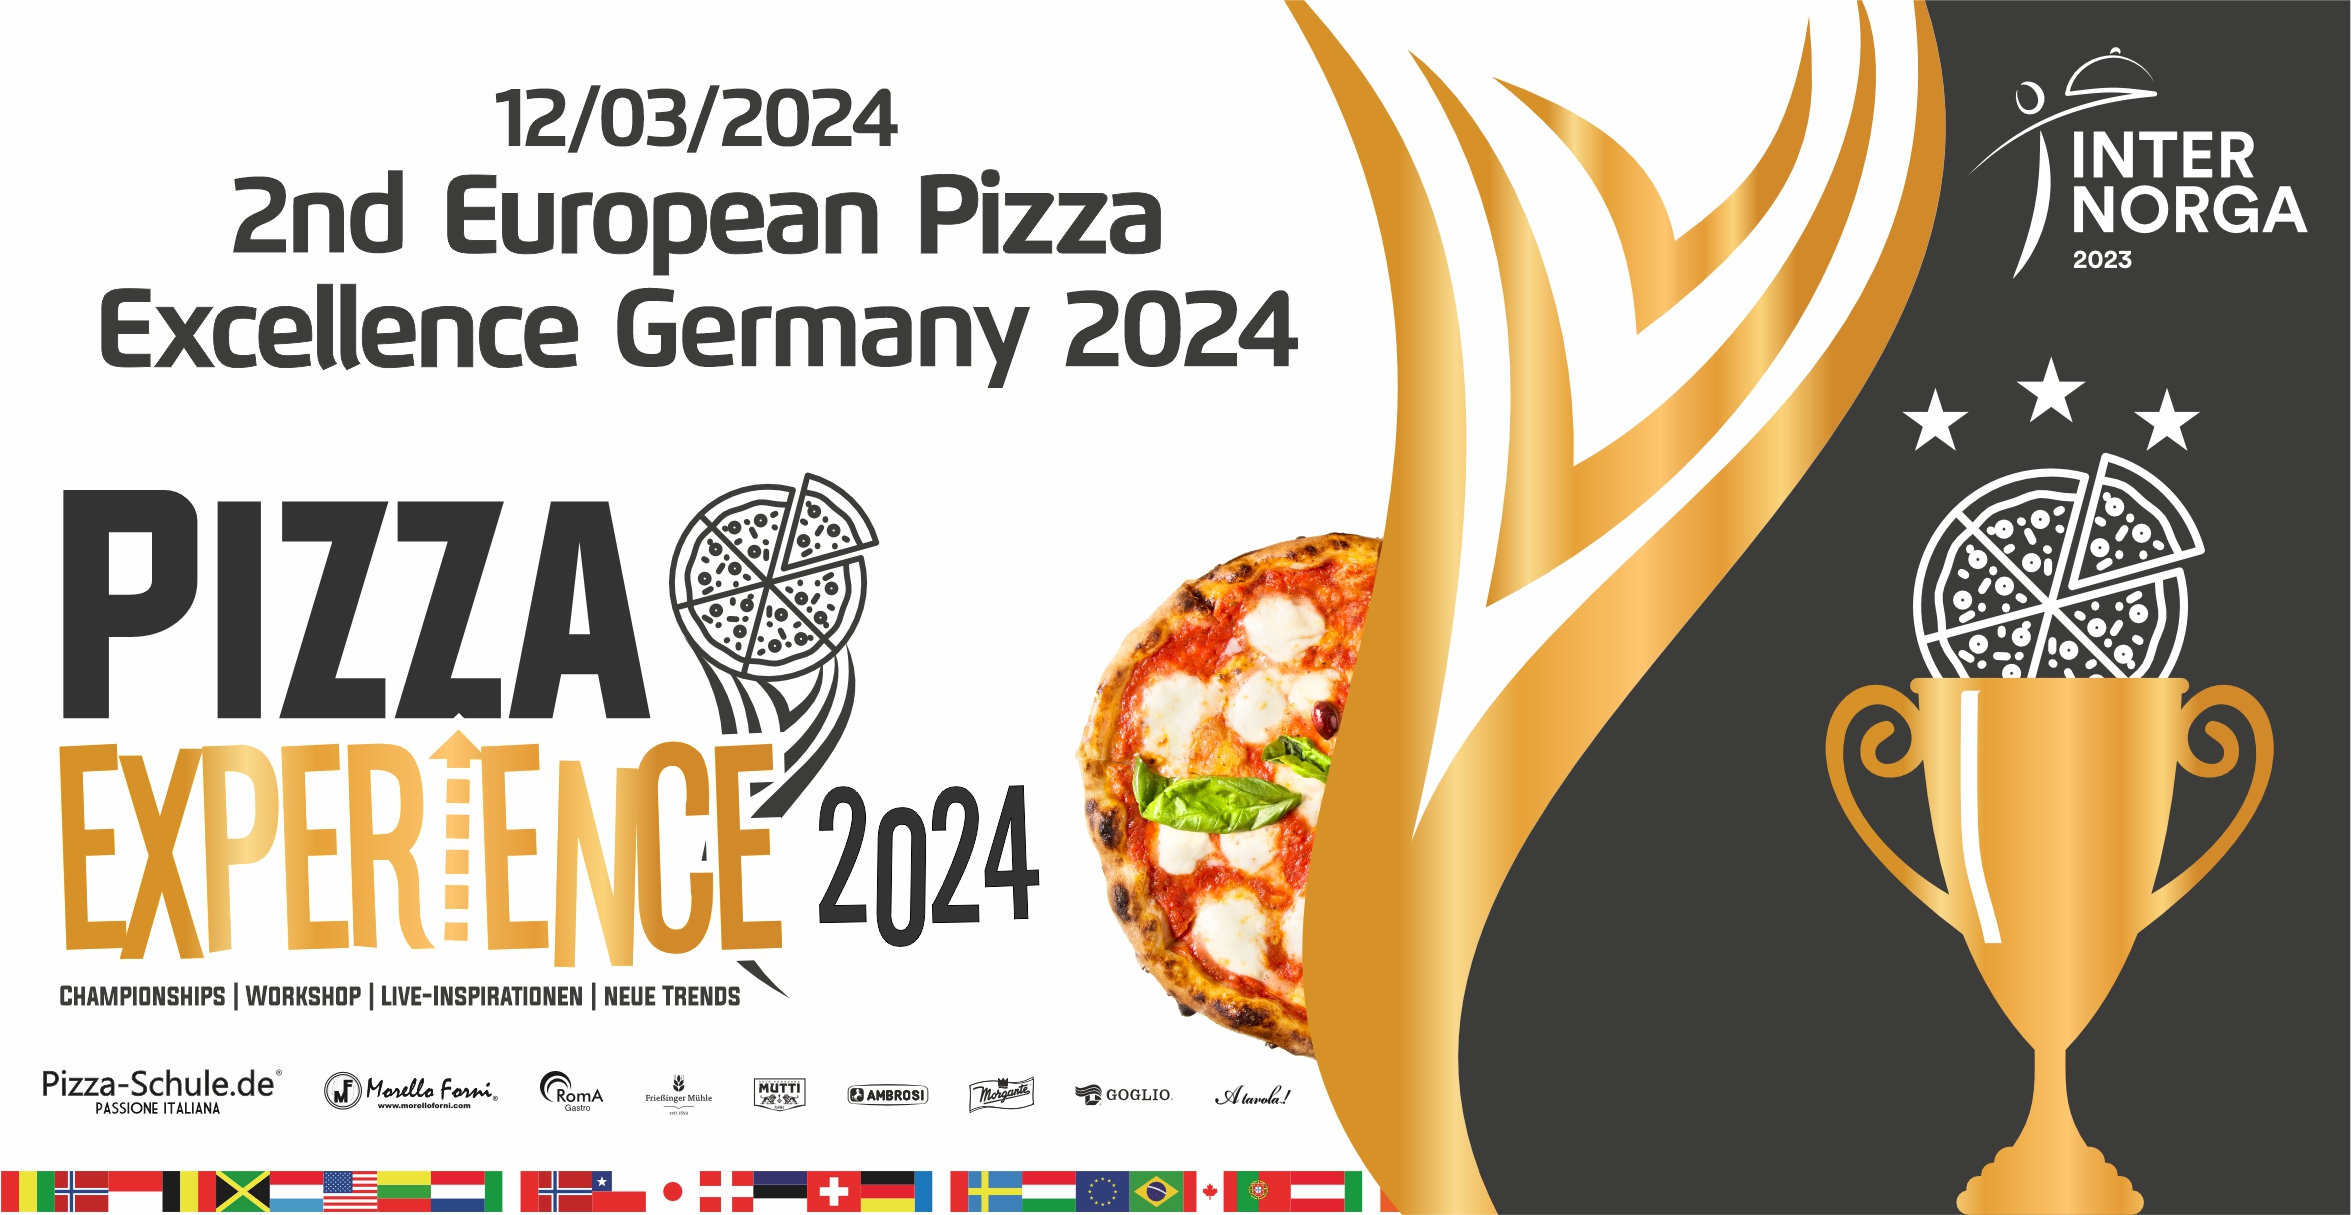 2nd European Pizza Excellence Germany 2024